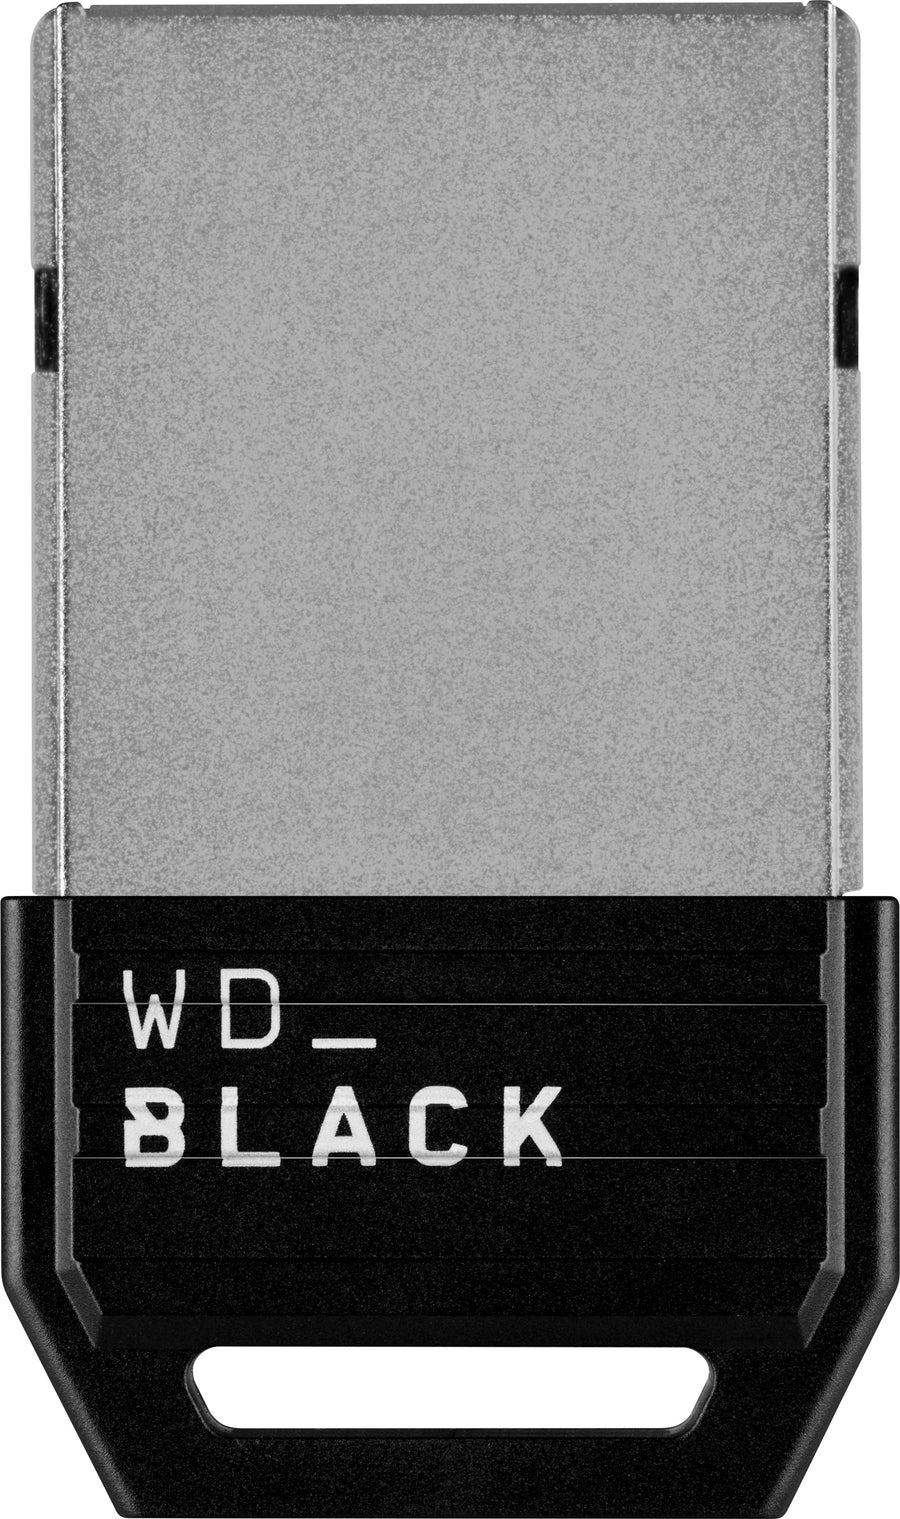 WD - BLACK C50 1TB Expansion Card for Xbox Series X|S Gaming Console SSD Storage - Black_0